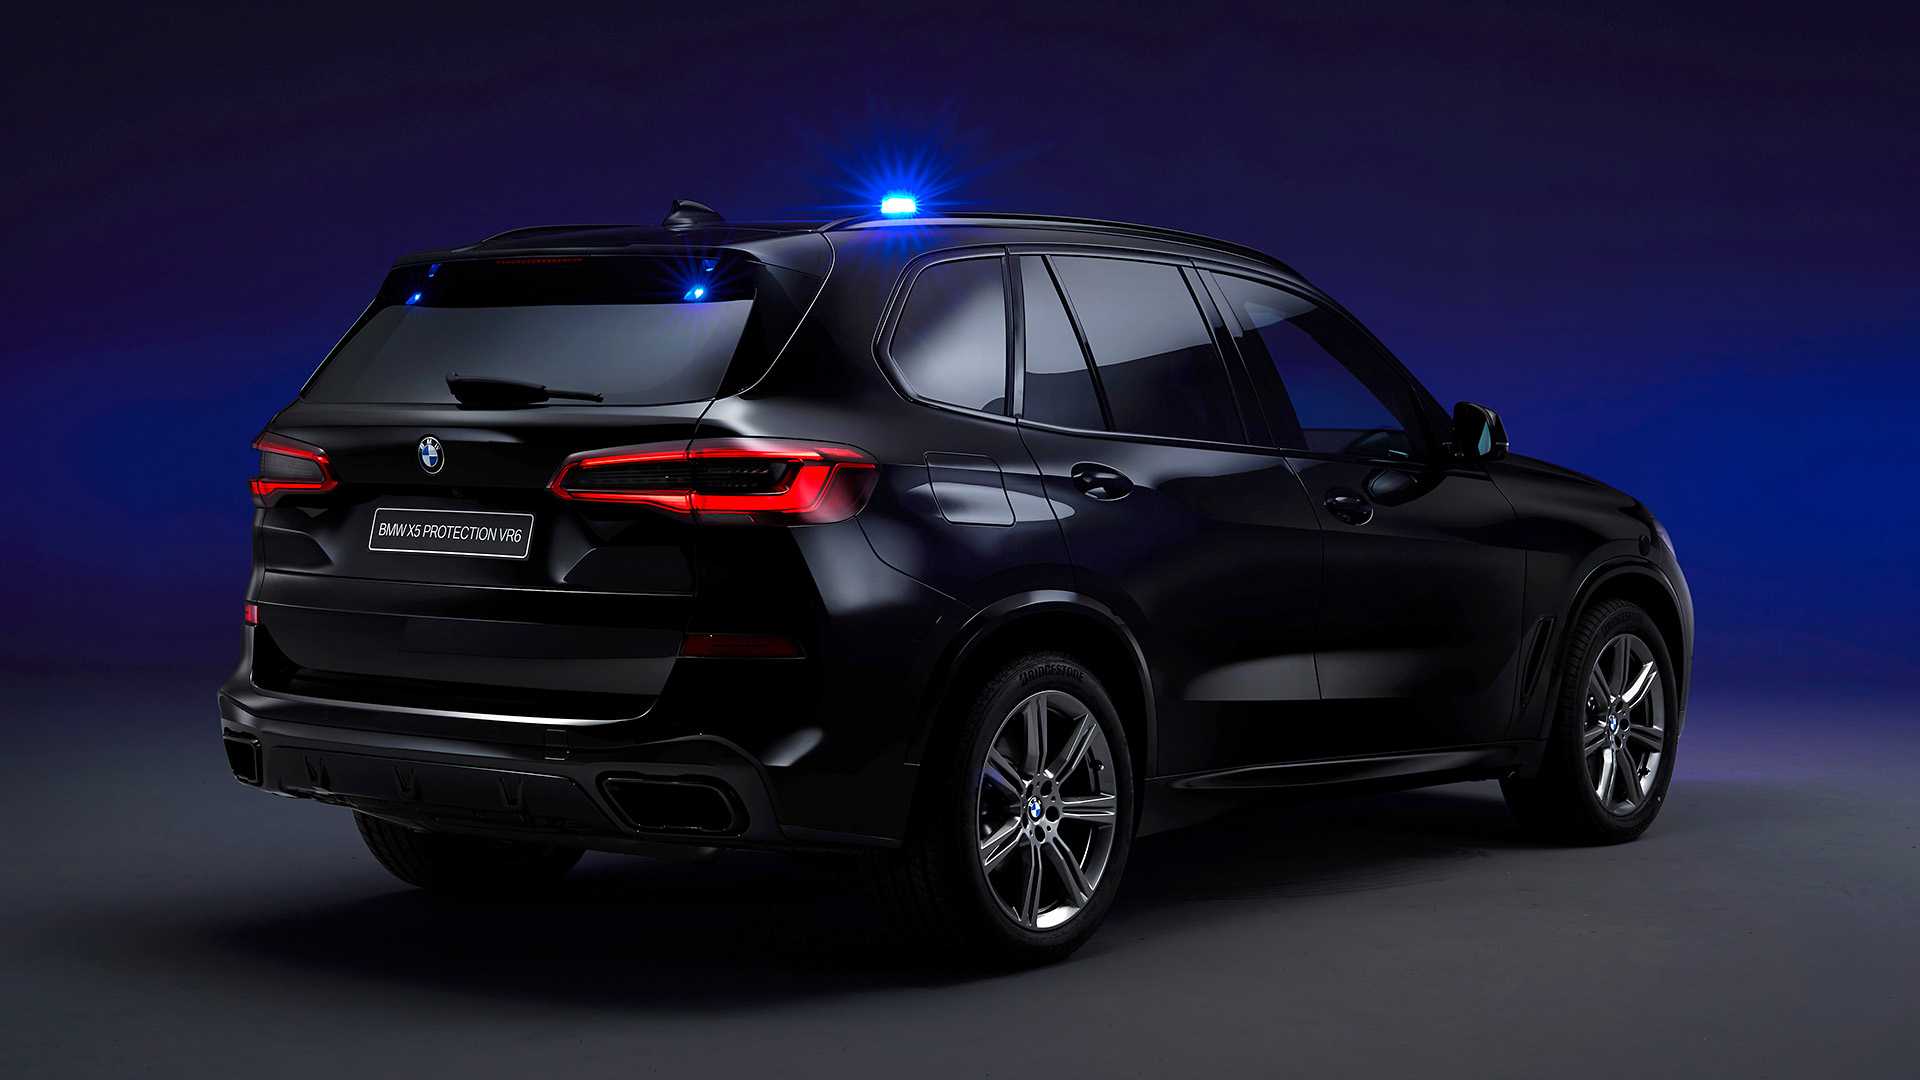 2020 BMW X5 Protection VR6 (Armored Vehicle) Rear Three-Quarter Wallpapers #13 of 25